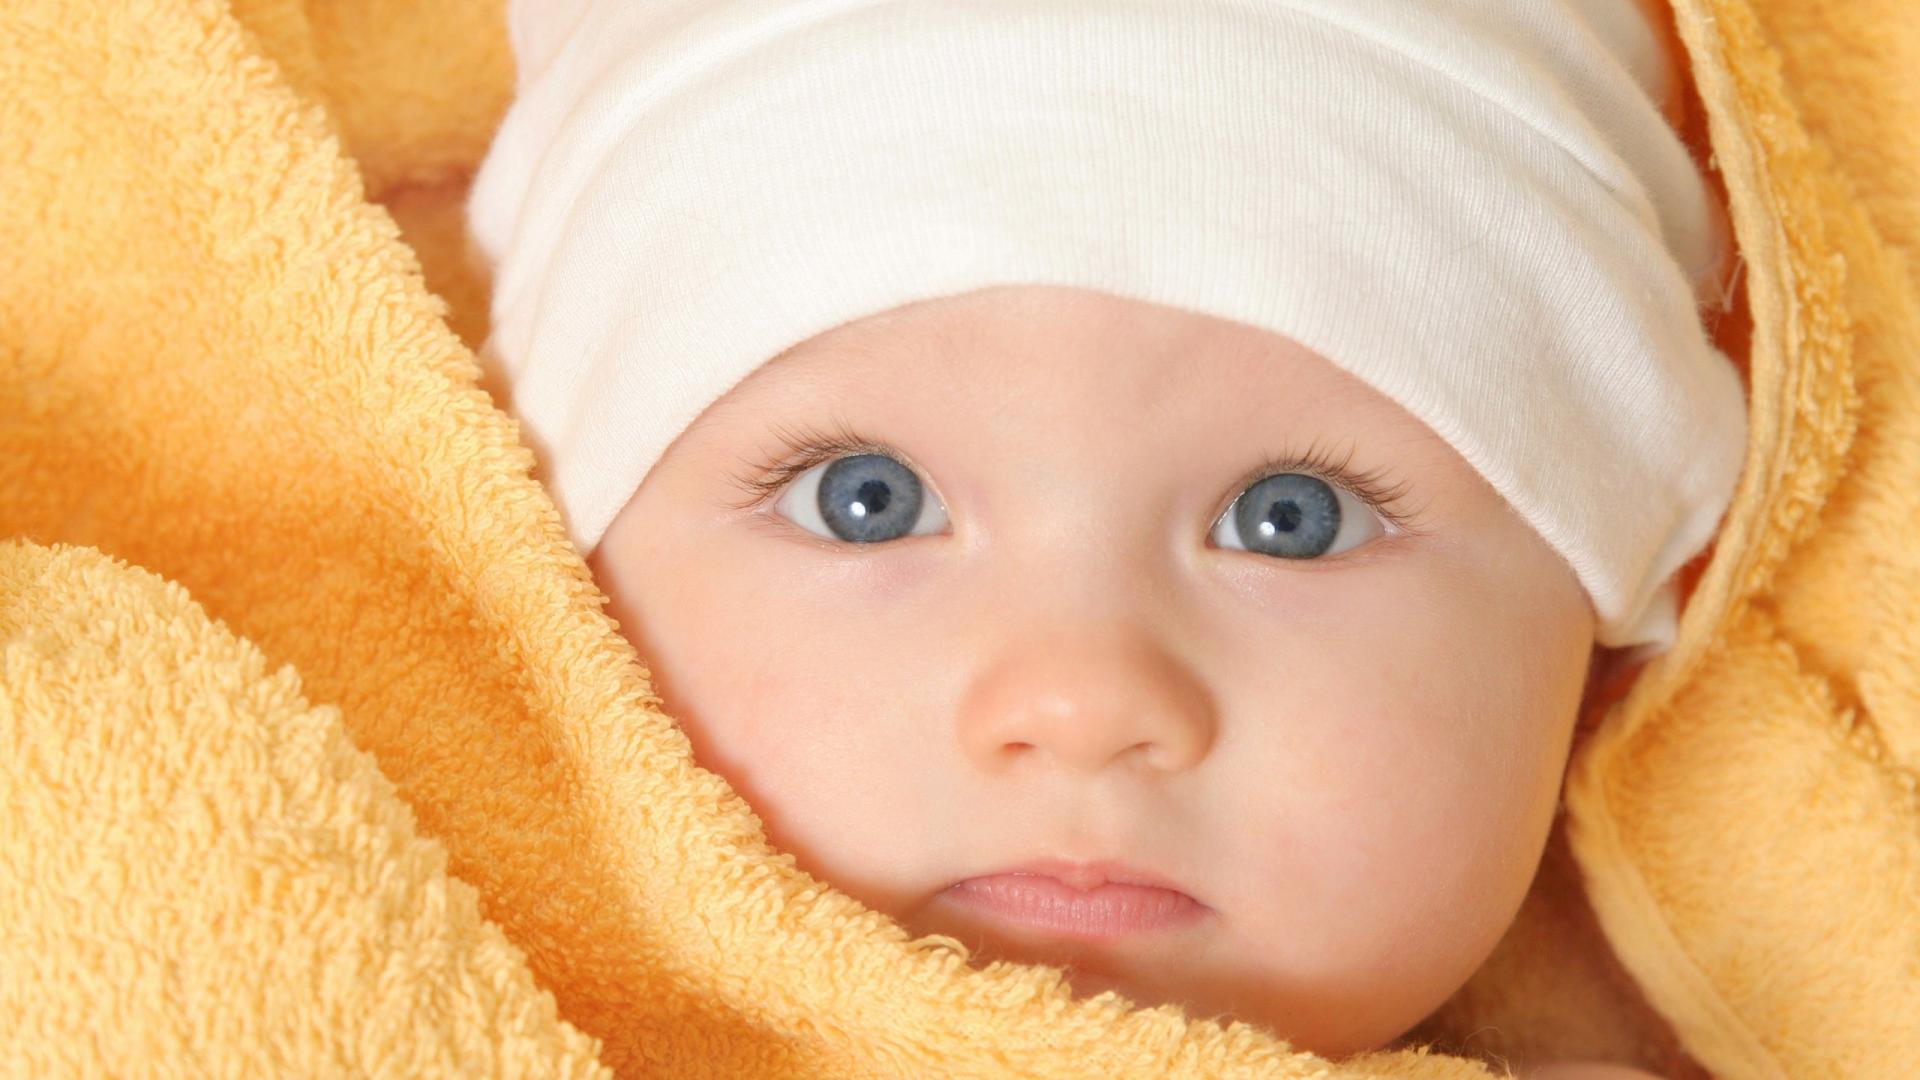 Download Blue Eyes Cute Baby Wallpaper Full HD Backgrounds